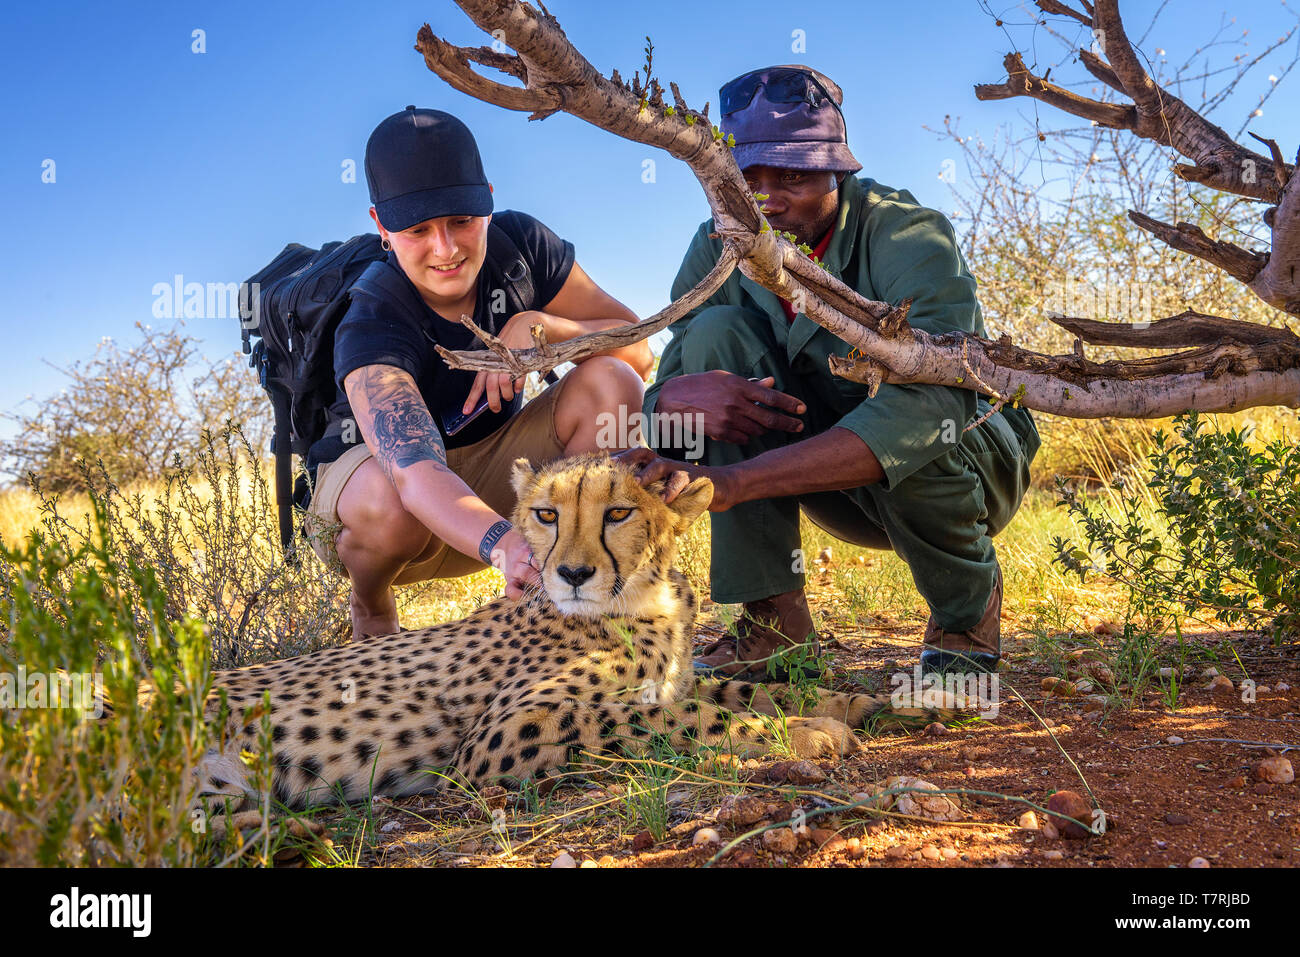 Keeper and a tourist petting a cheetah Stock Photo